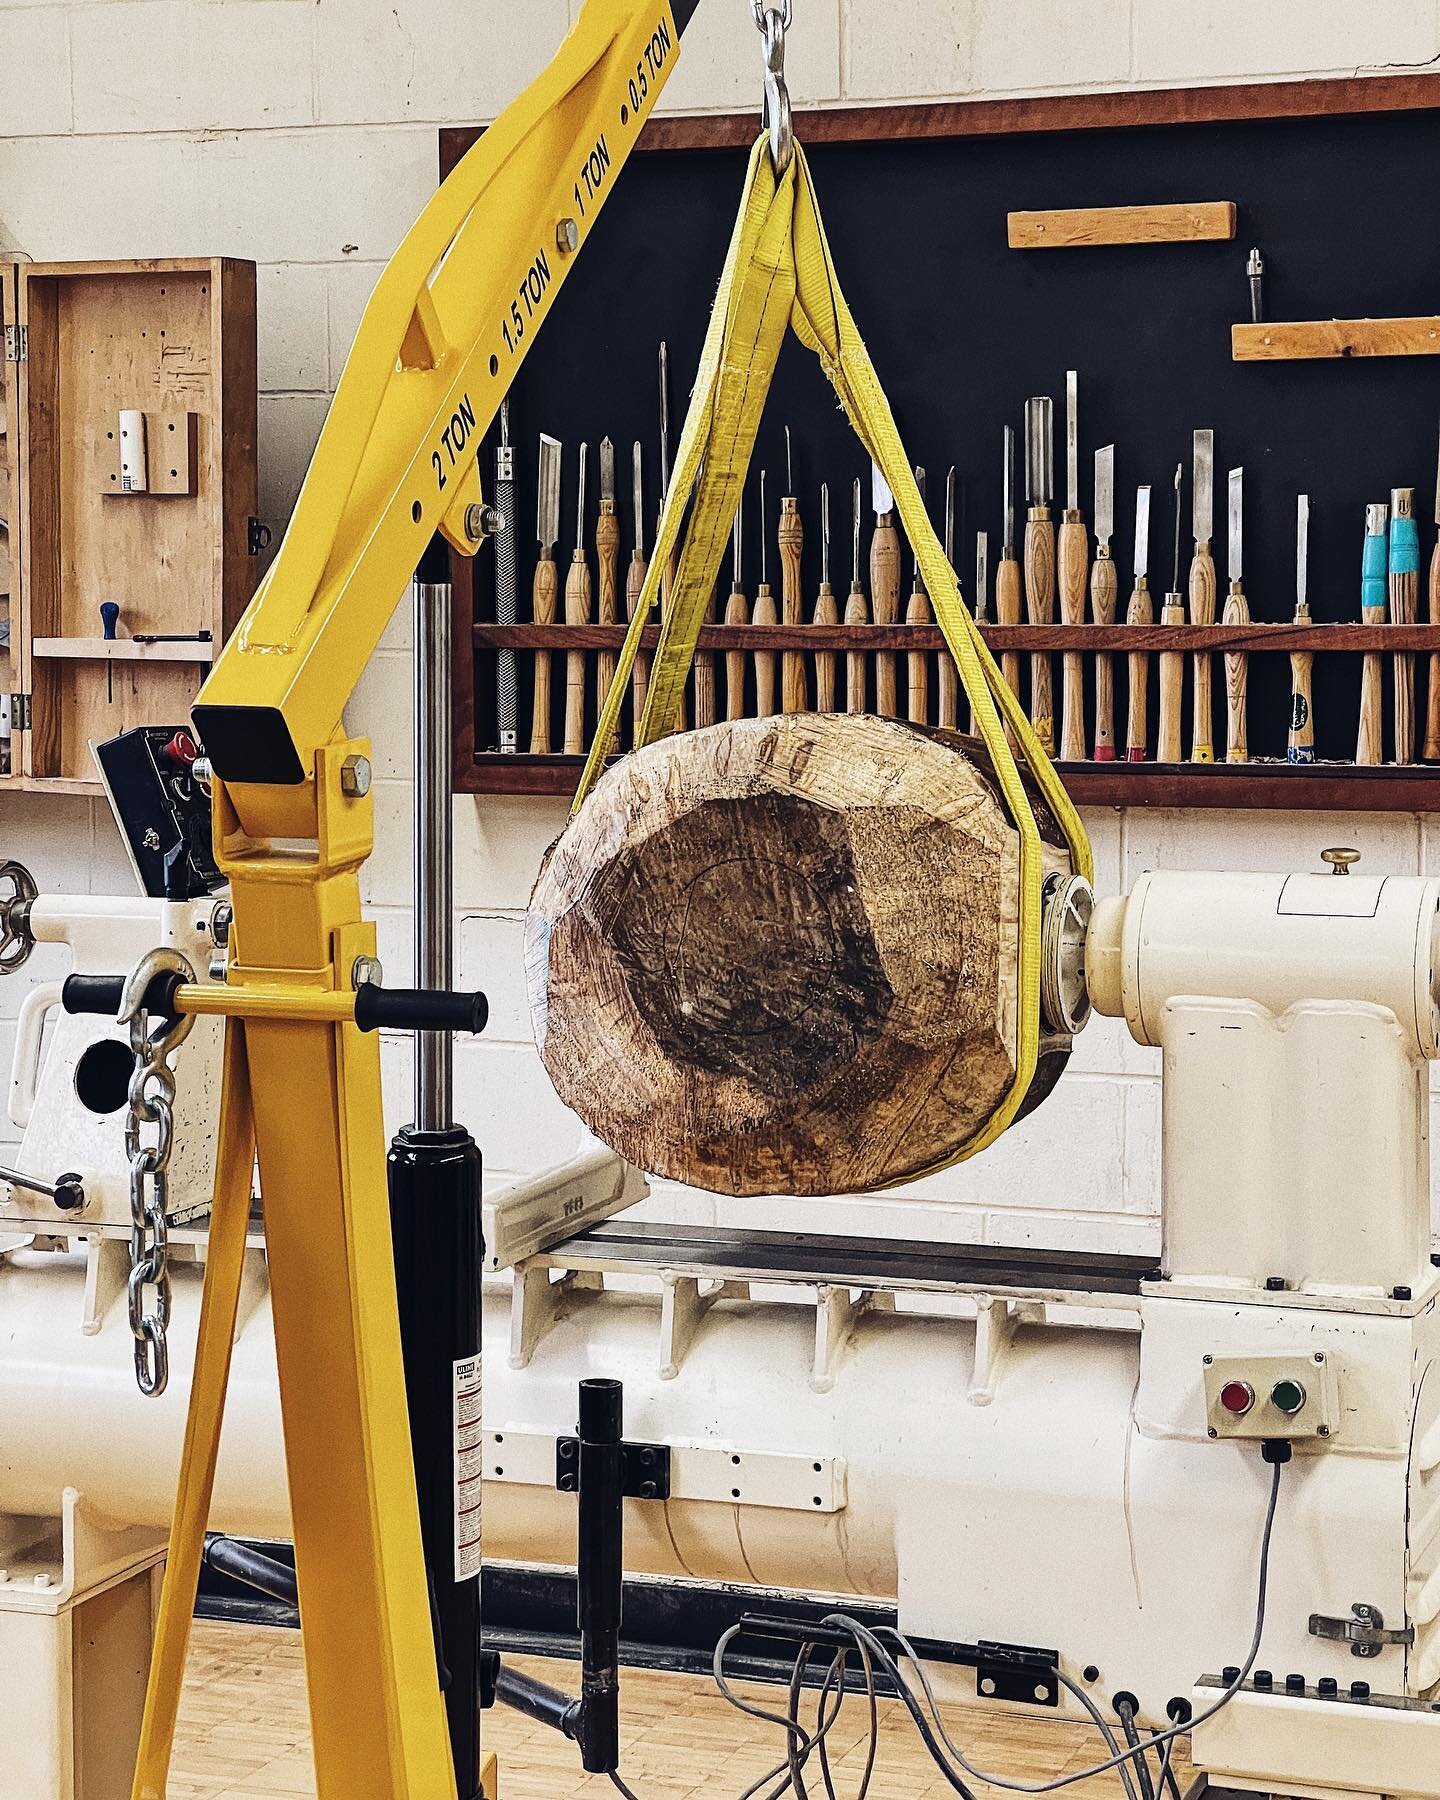 Big things are happening&hellip;
.
.
.
Special thanks to Naomi [ @gnomesinreddesign ] and Mitch [ @mgoldst ] for helping me get this monstrosity up onto the lathe
.
.
#woodworking #greenwood #greenwoodworking #greenwoodturning #greenturning #ritsac #